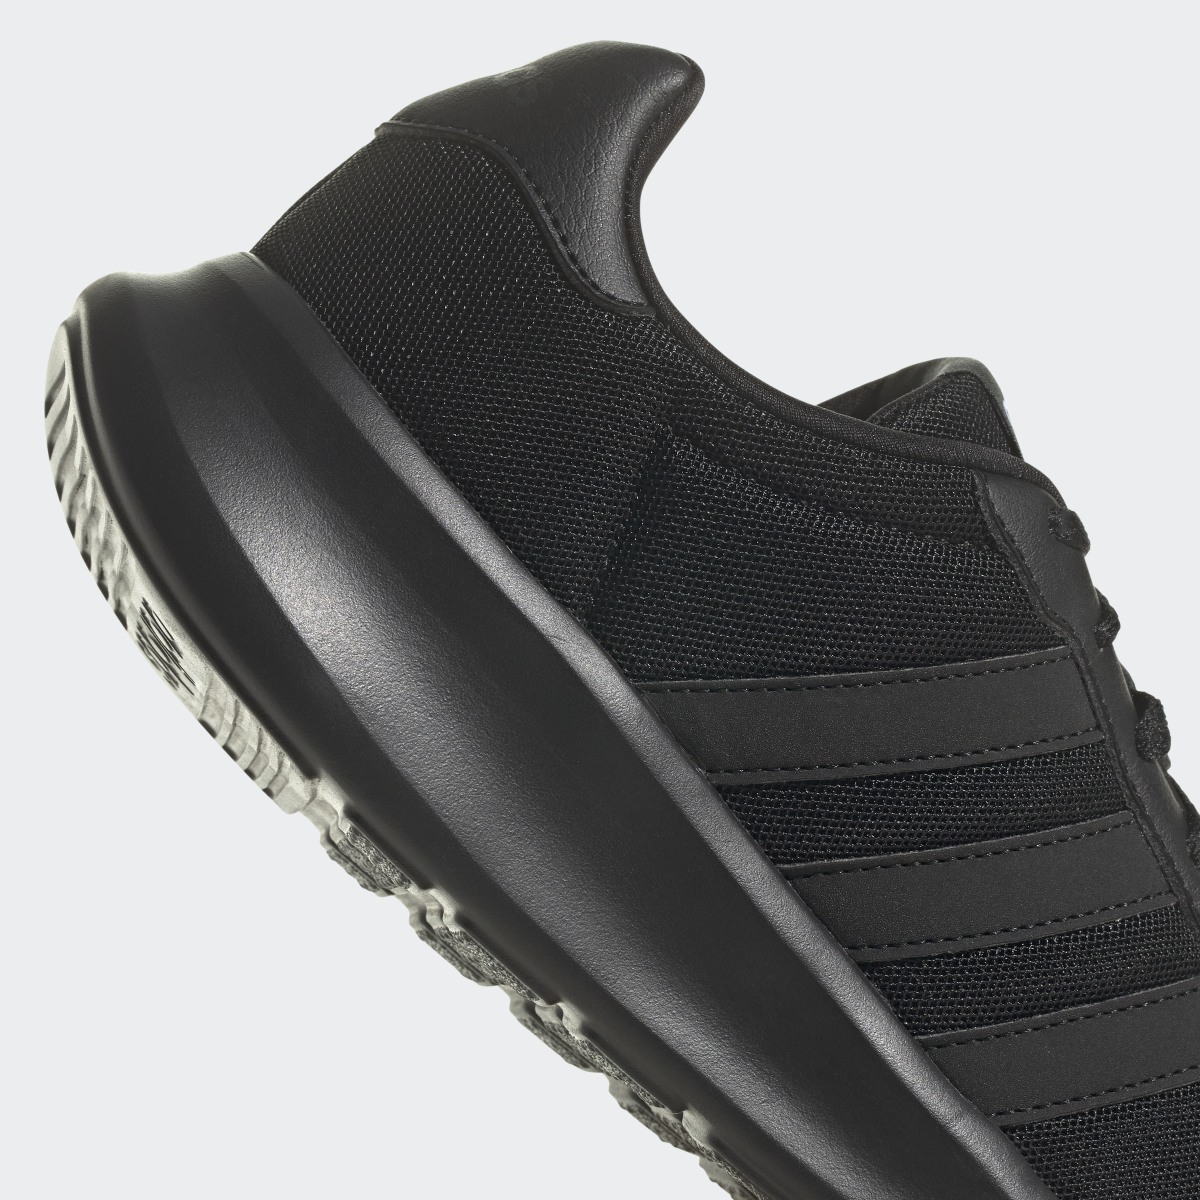 Adidas Lite Racer 3.0 Shoes. 12